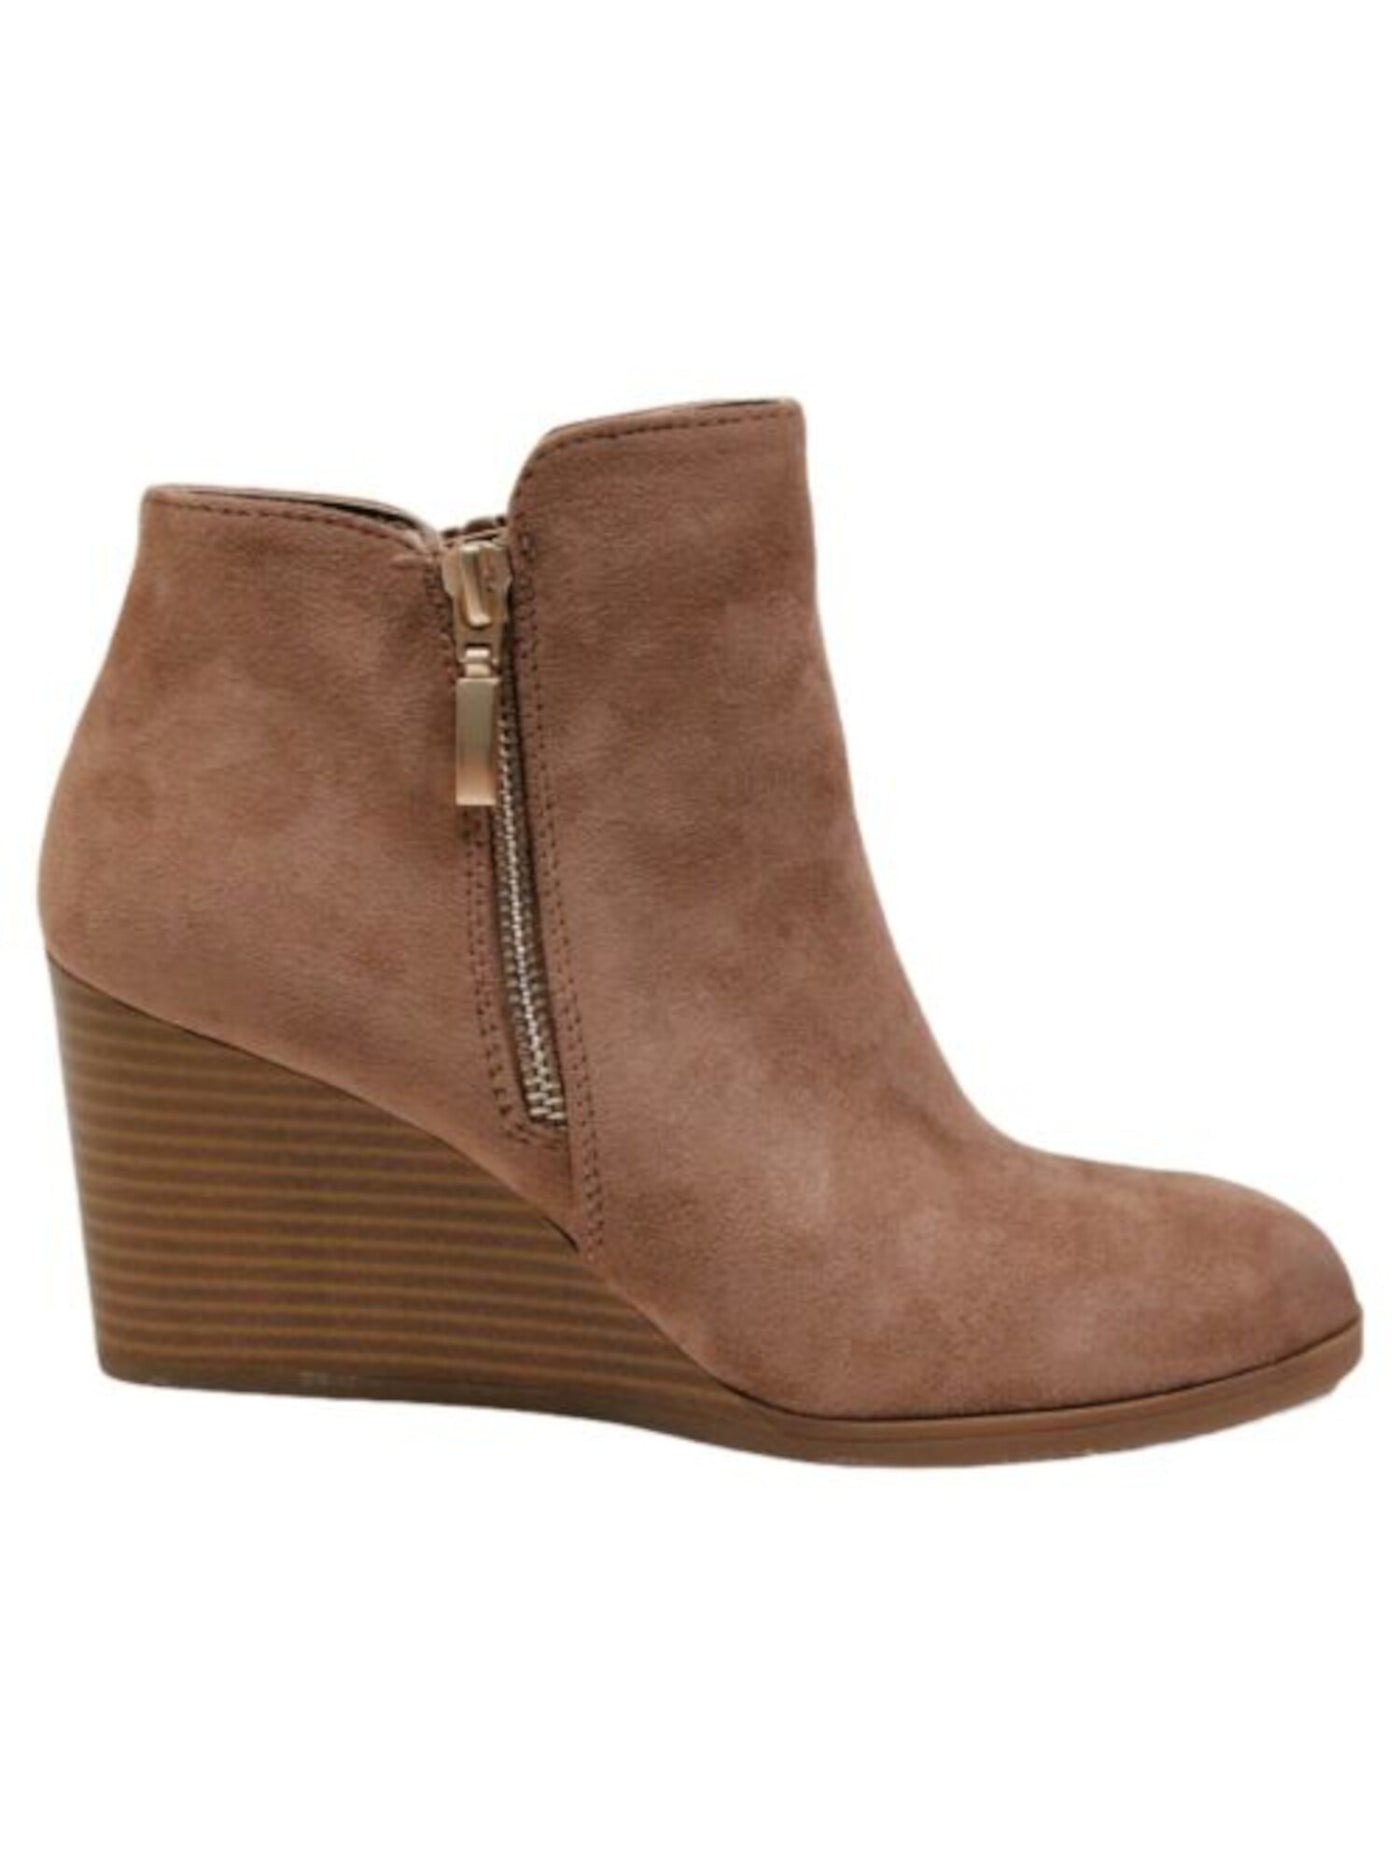 STYLE & COMPANY Womens Beige Asymmetrical Topline Cushioned Round Toe Wedge Zip-Up Booties 11 M